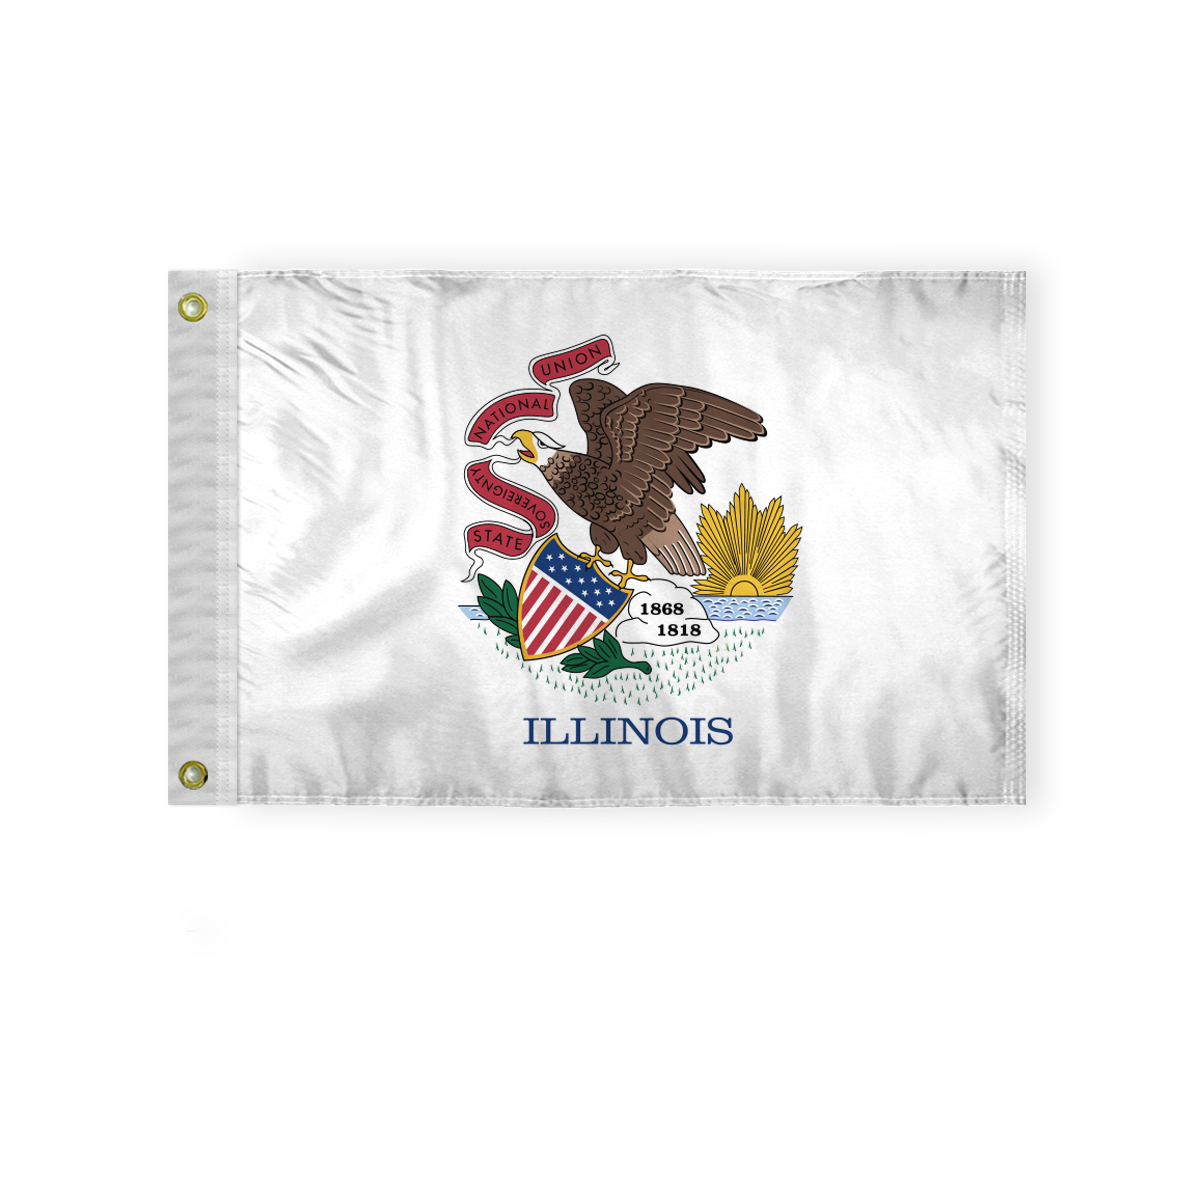 AGAS Illinois State Boat Flag 12x18 Inch - Double Sided Reverse Print On Back 200D Nylon